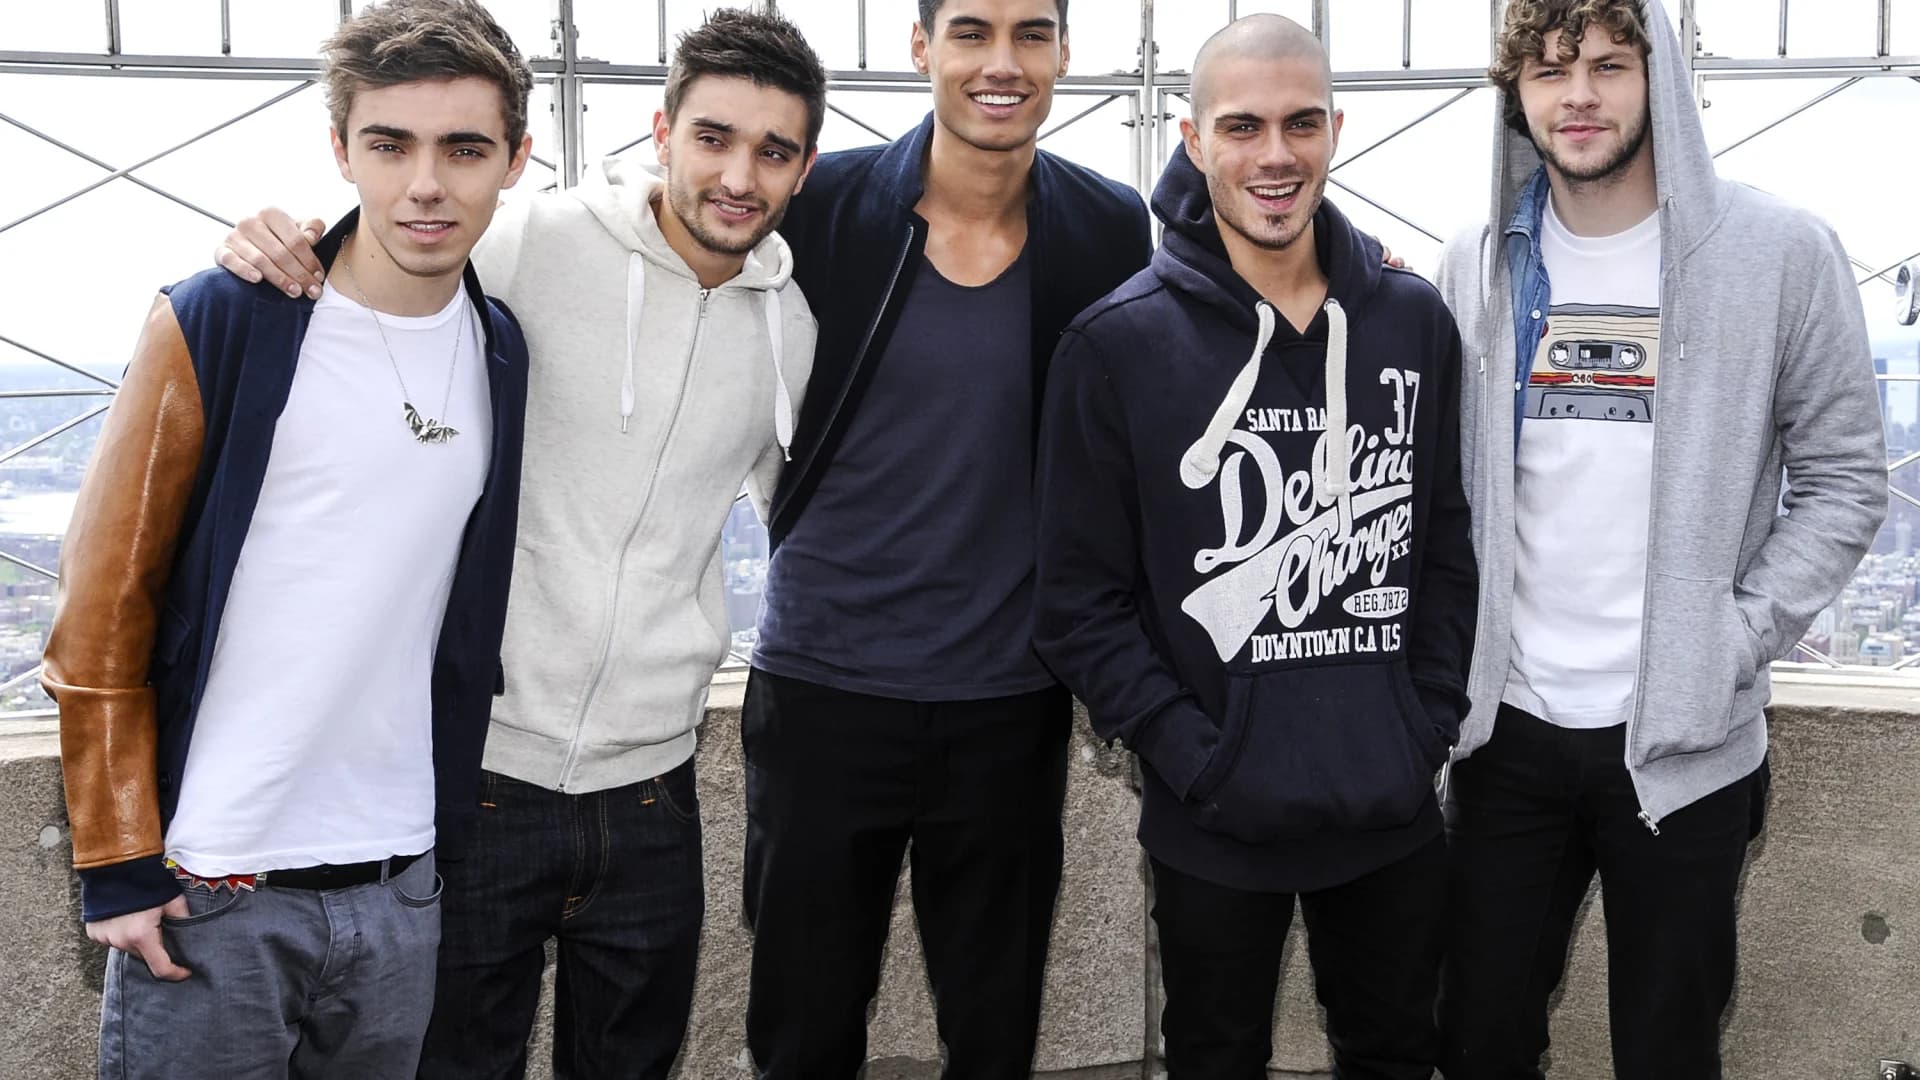 The Wanted singer Tom Parker dies of brain tumor at 33